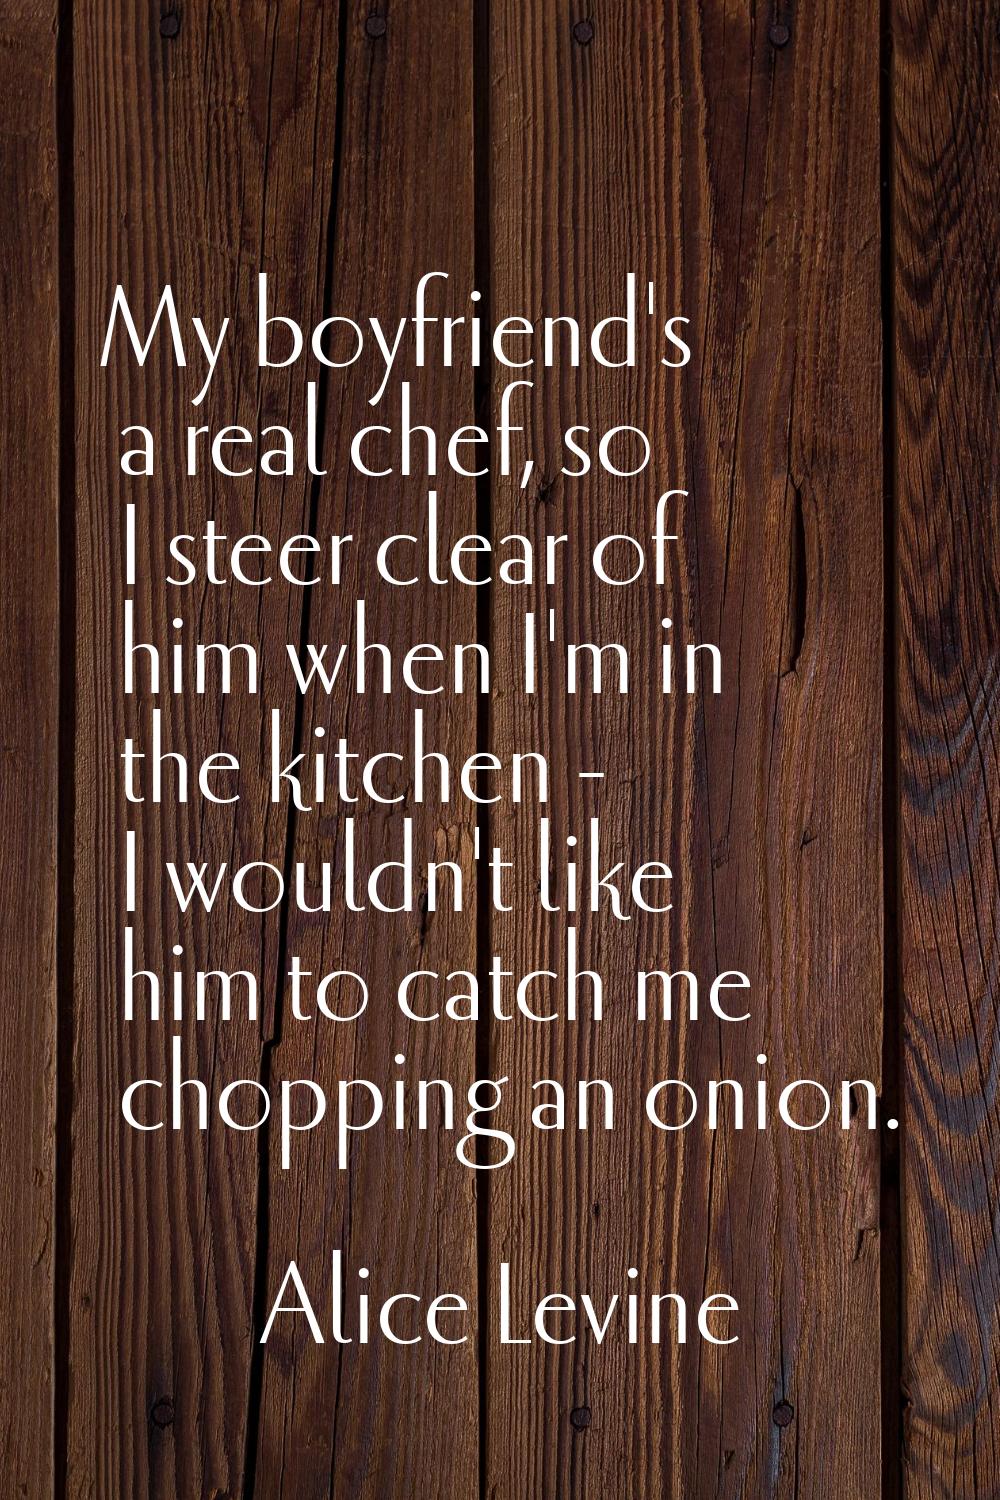 My boyfriend's a real chef, so I steer clear of him when I'm in the kitchen - I wouldn't like him t